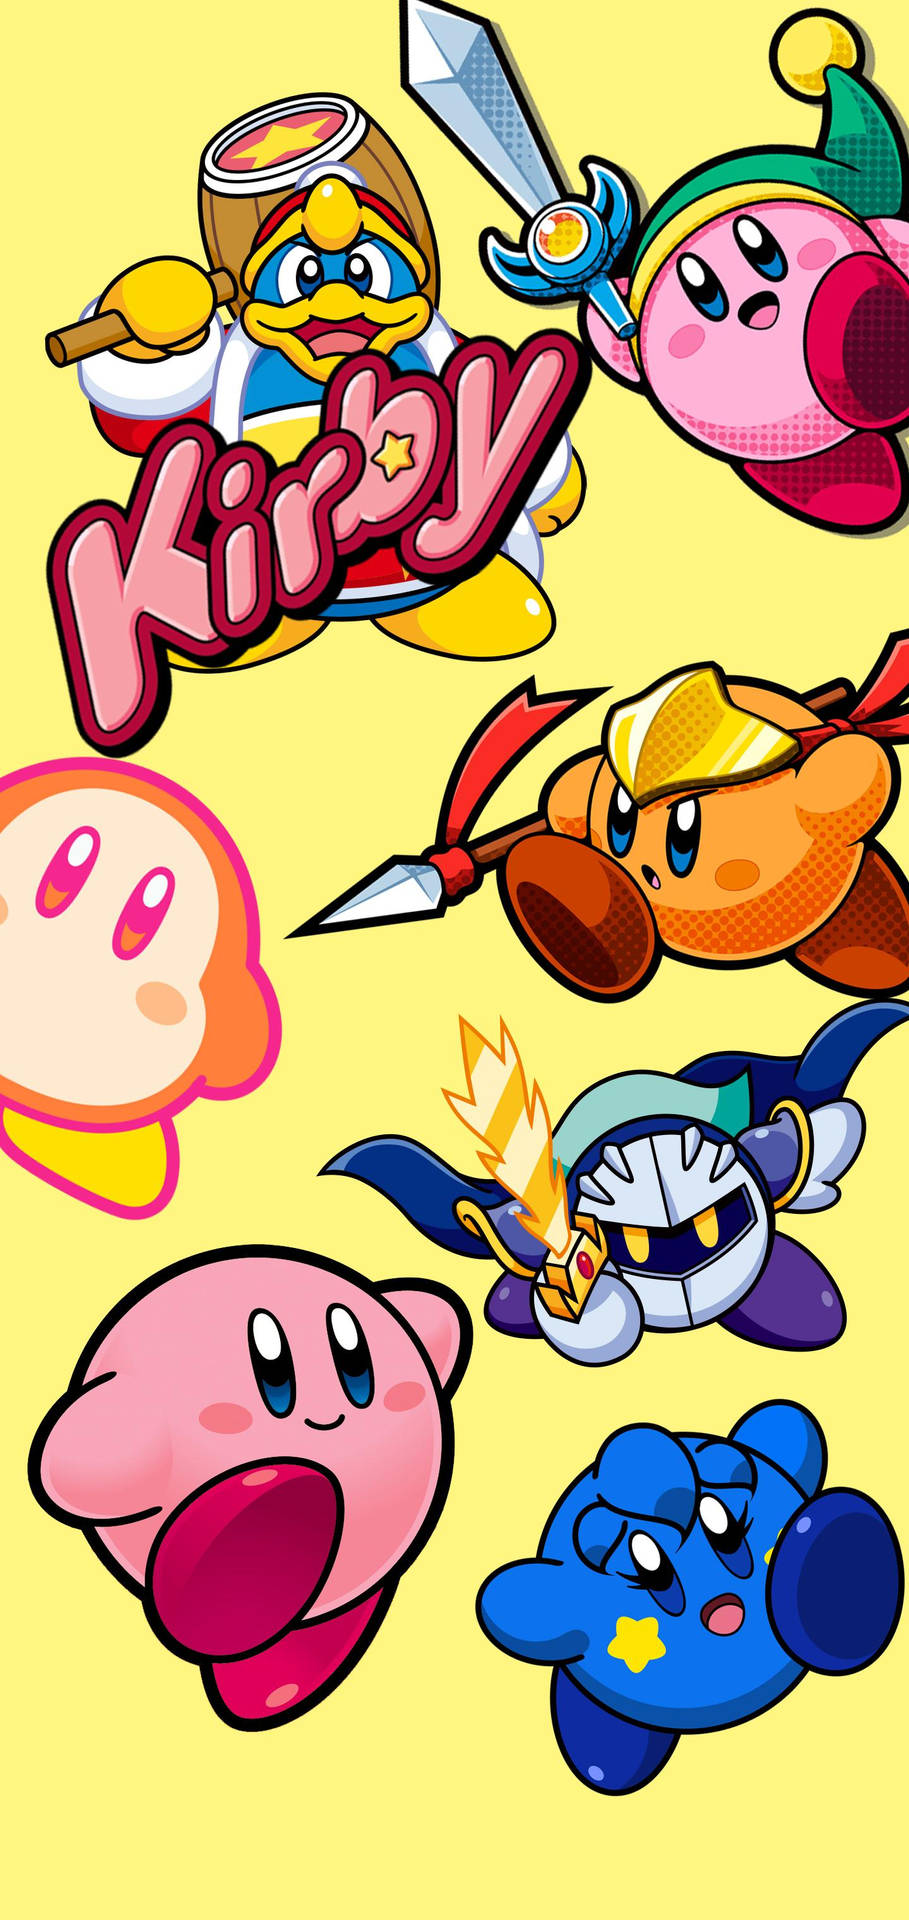 Enjoying the Fun Times: Kirby and His Friends Wallpaper